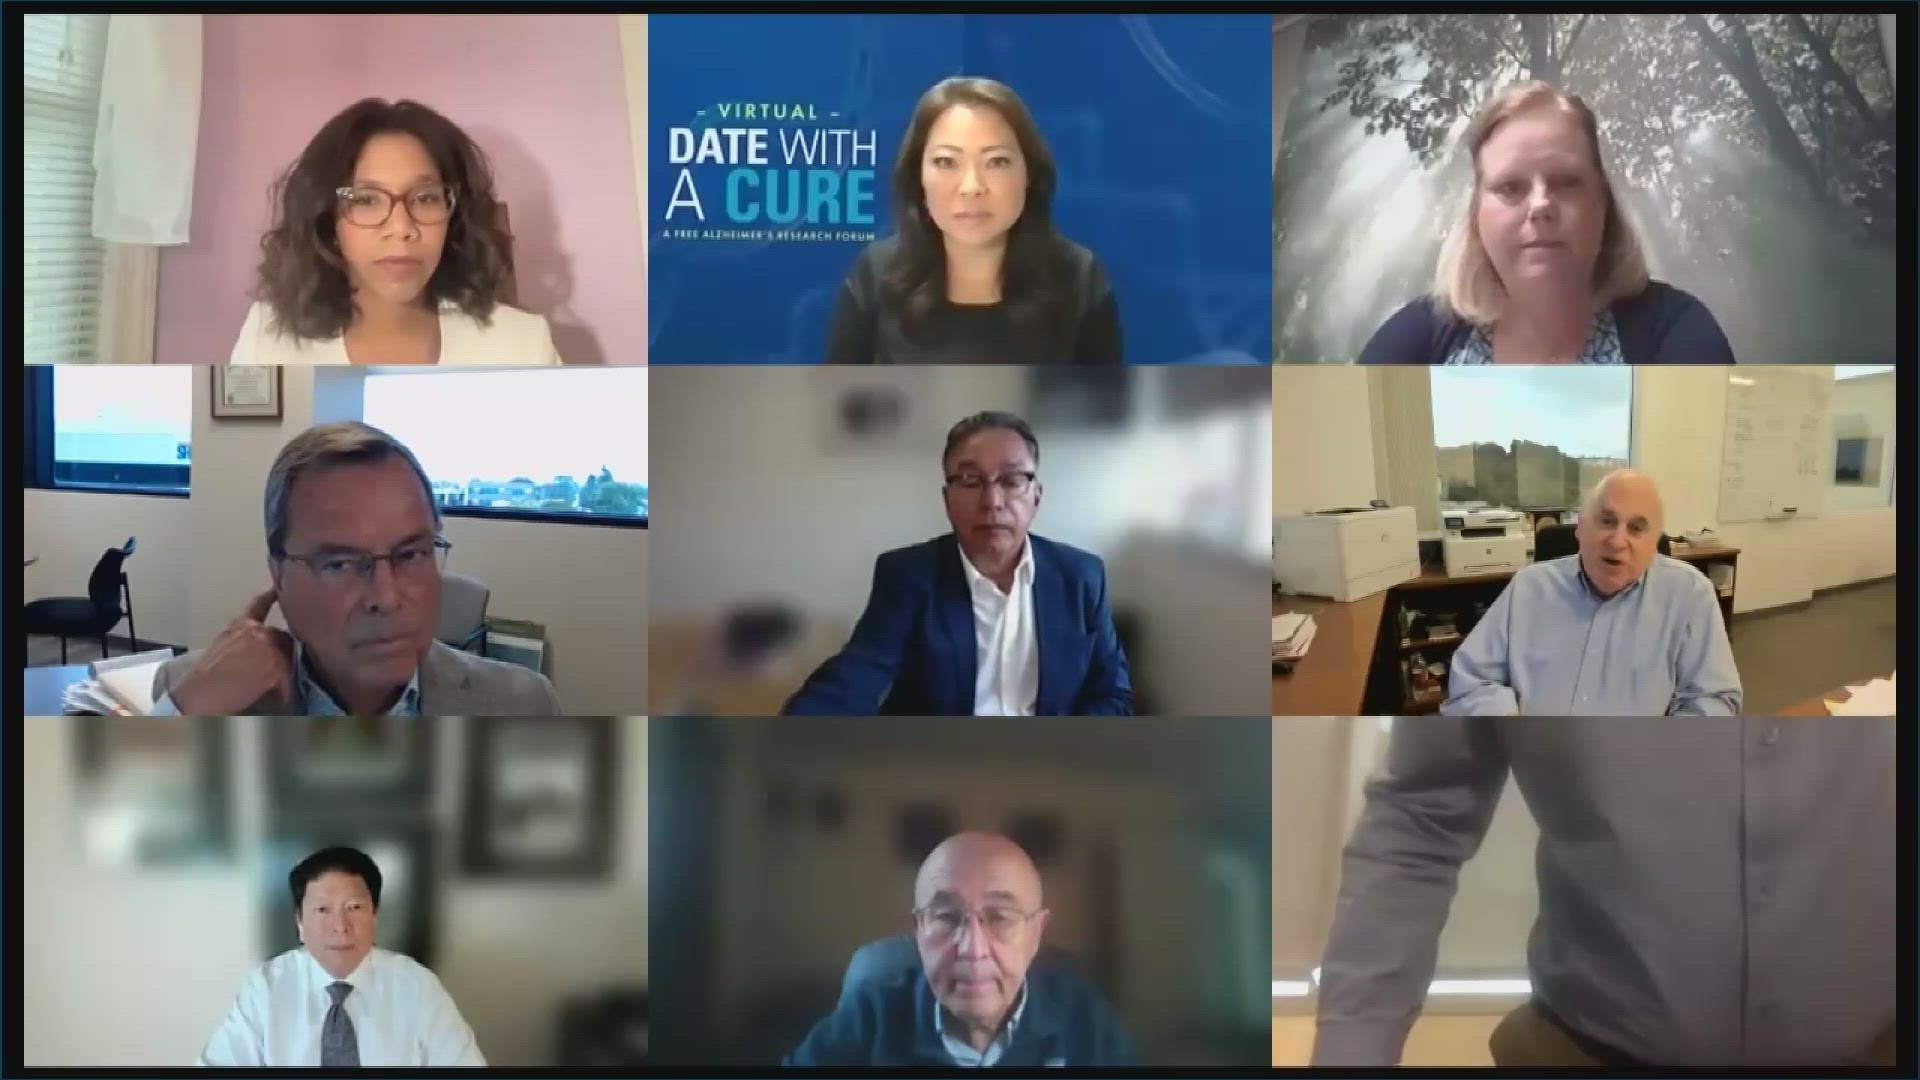 People attending the webinar got rare access to world renowned doctors and researchers, directly asking questions about the disease, advancements and hope for a cure